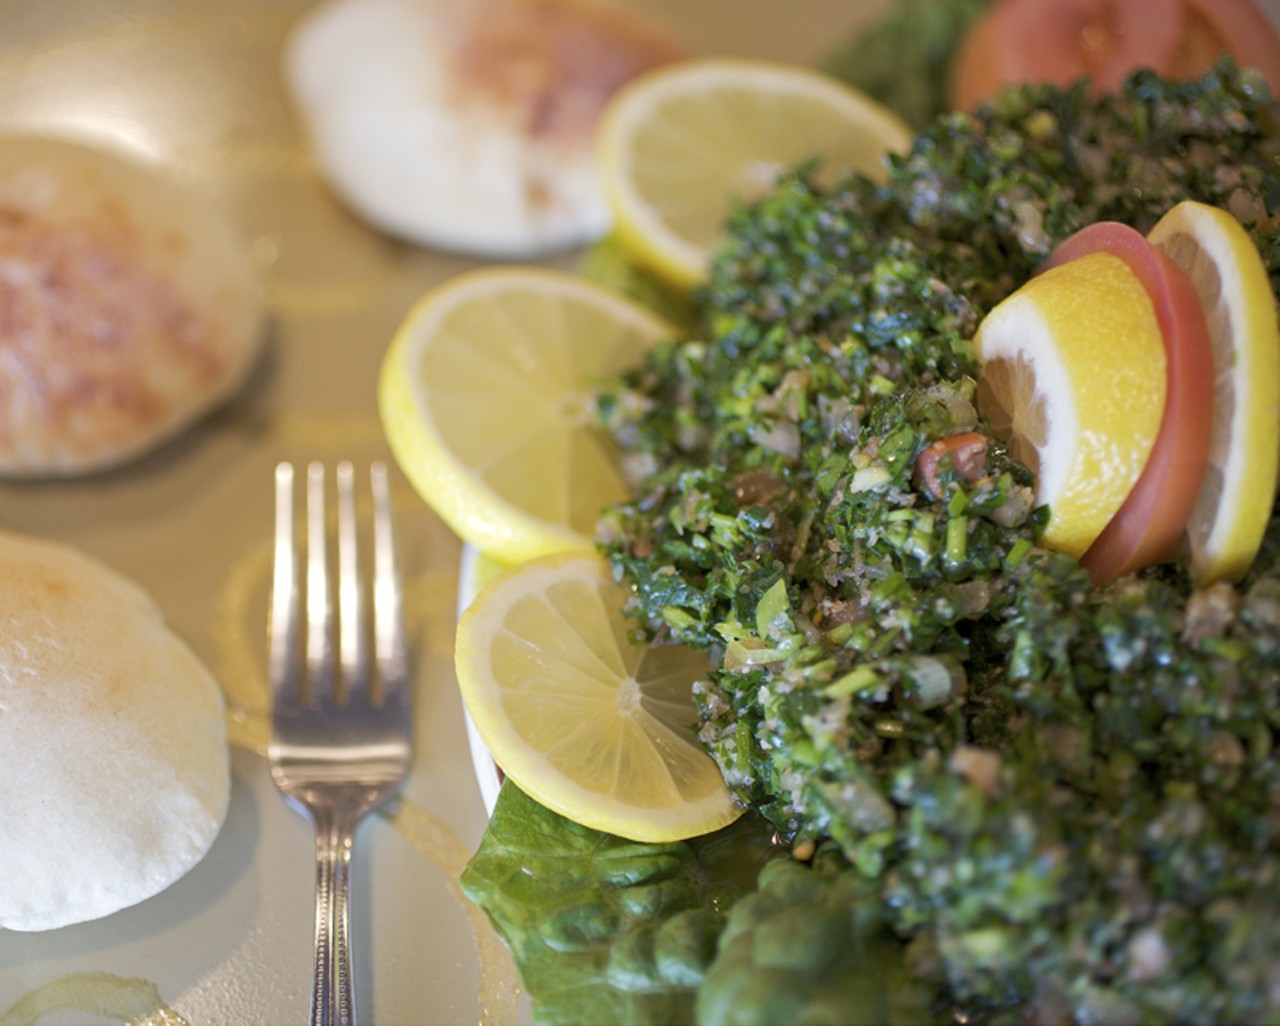 Tabbouleh, a salad dish, is comprised of parsley, tomatoes, green onion, bulgar wheat, lemon juice and olive oil.